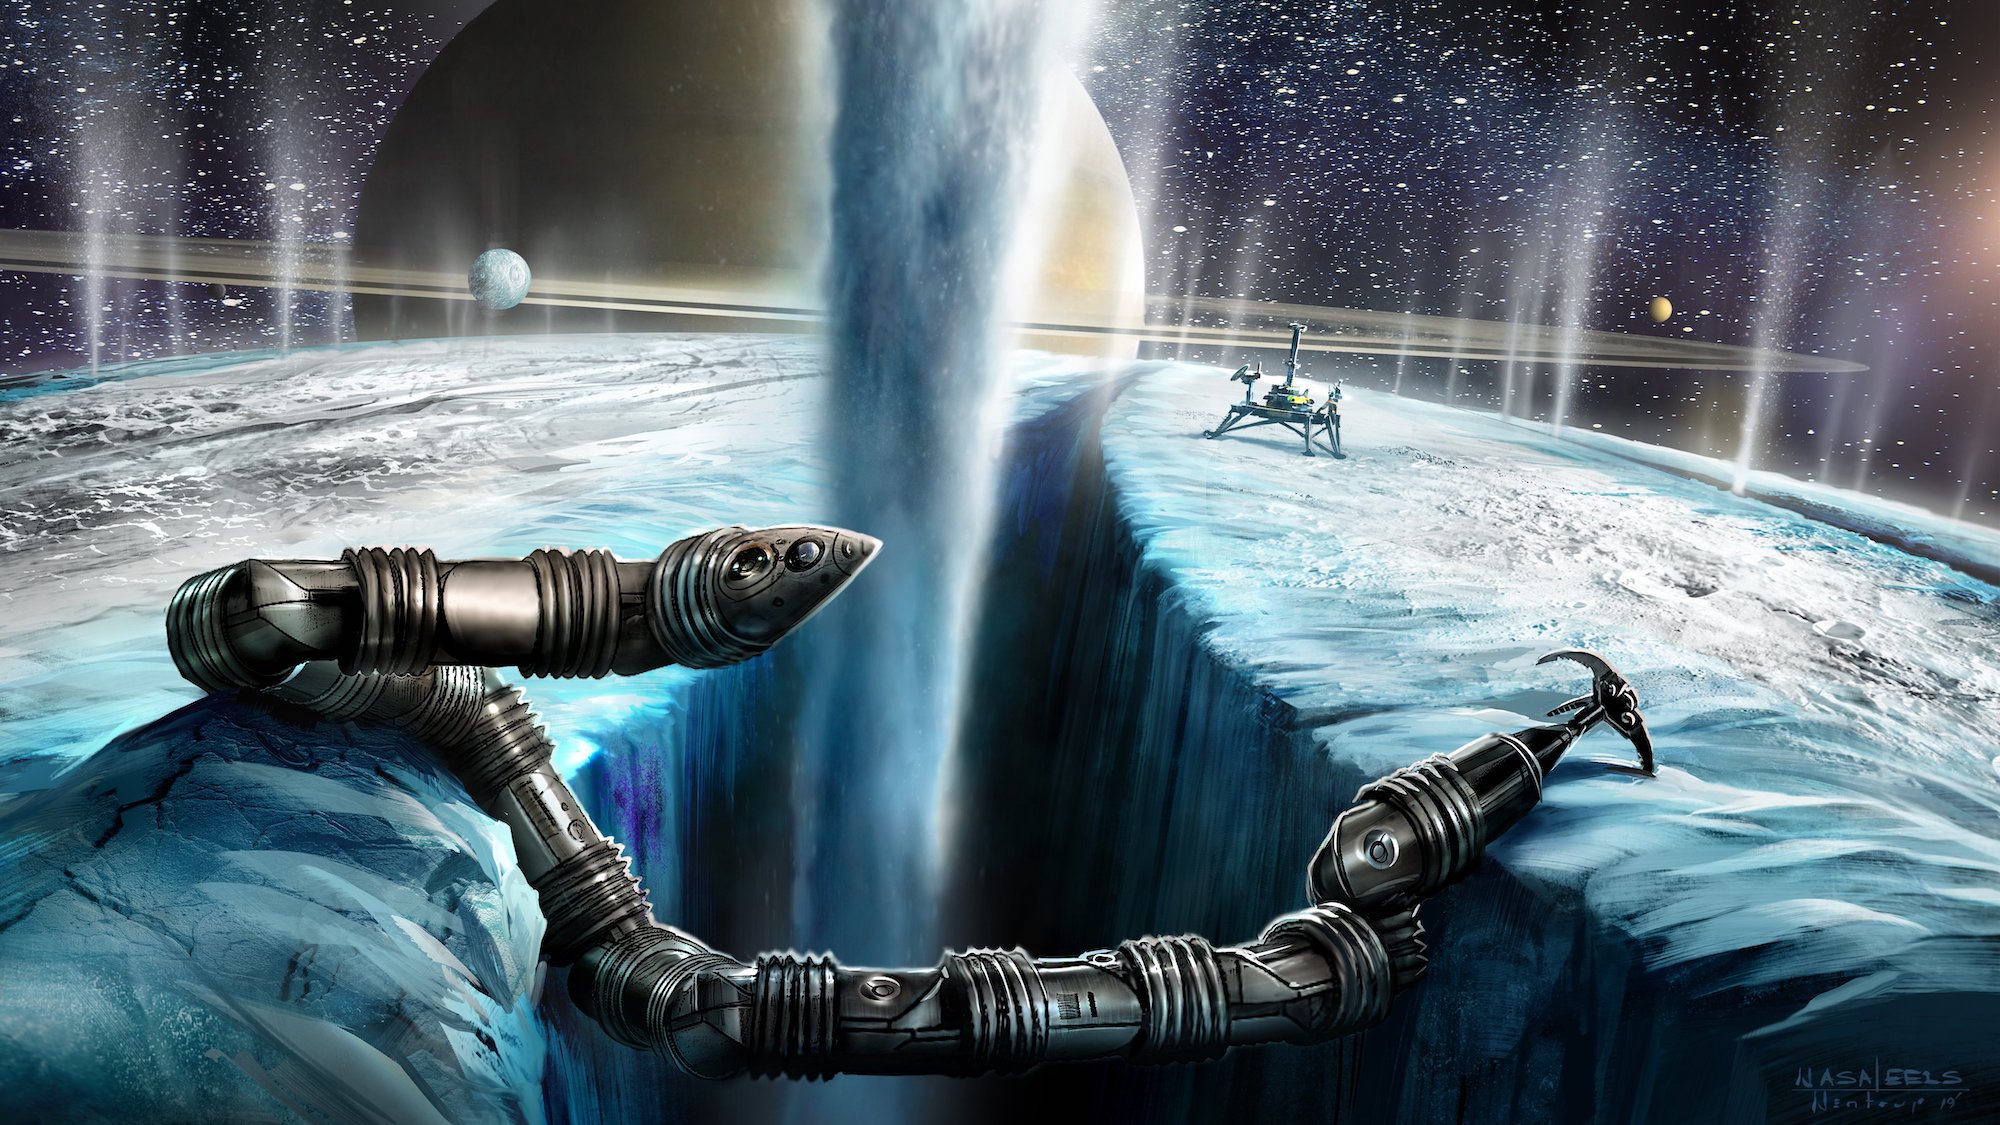 NASA hopes its snake robot can search for alien life on Saturn’s moon Enceladus